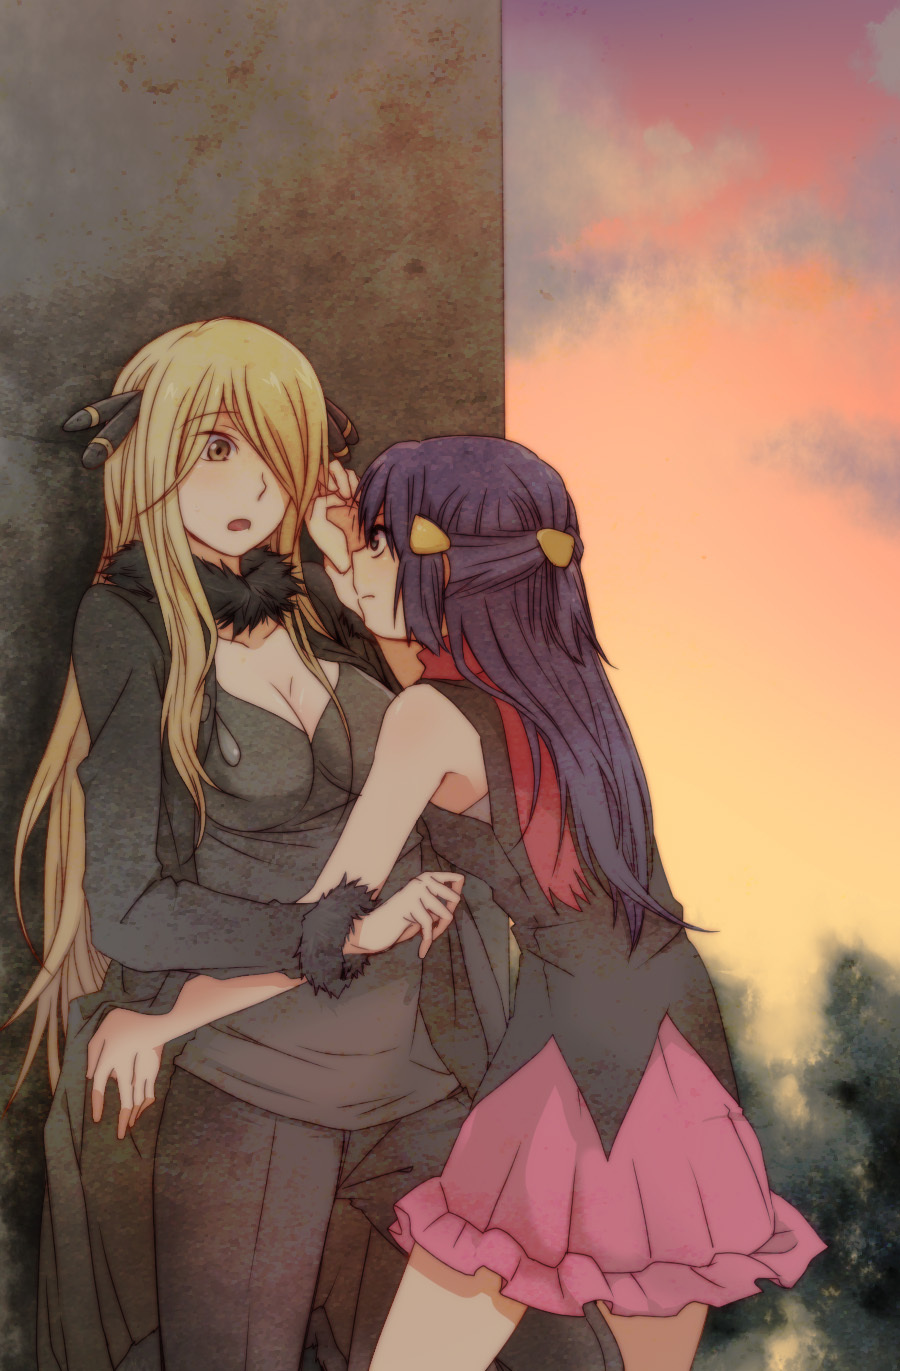 2girls against_wall age_difference arm arms art bare_legs between_legs big_breasts blonde_hair blue_eyes blue_hair blush breasts choker cleavage coat cynthia dawn dress female forced hair_ornament hair_over_one_eye high_res highres hikari_(pokemon) large_breasts legs long_hair long_sleeves multiple_girls nintendo open_mouth pants pink_skirt pokemon pokemon_(anime) pokemon_(game) pokemon_dppt red_scarf restrained rex_k role_reversal scarf serious shirona_(pokemon) shy skirt sleeveless sleeveless_dress standing sunset twilight wrist_grab yellow_eyes yuri